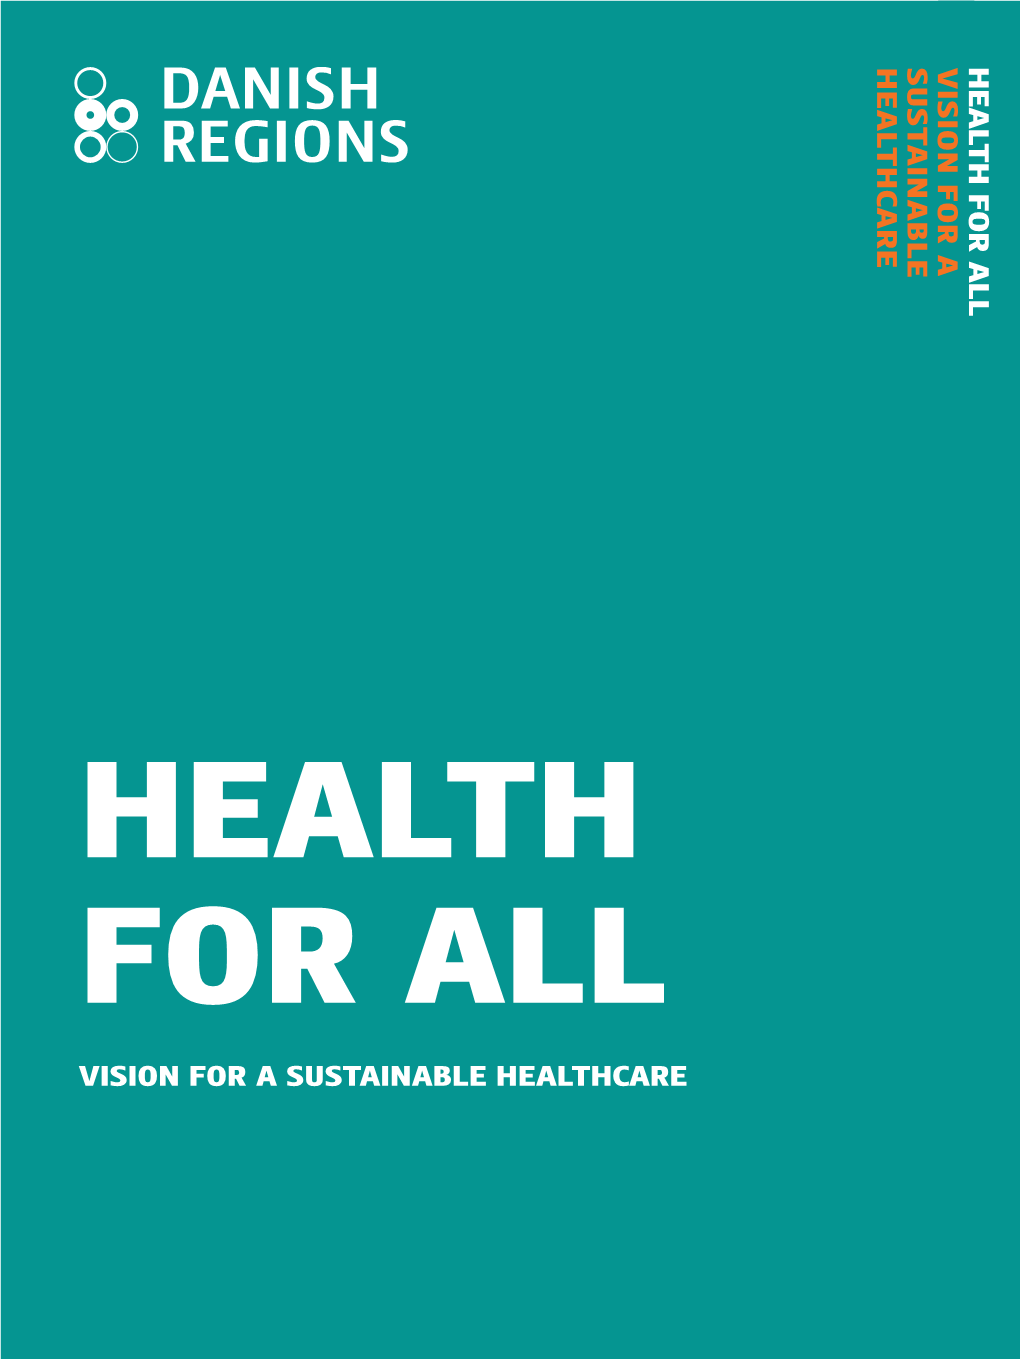 Health for All Healthvision for for All a 1